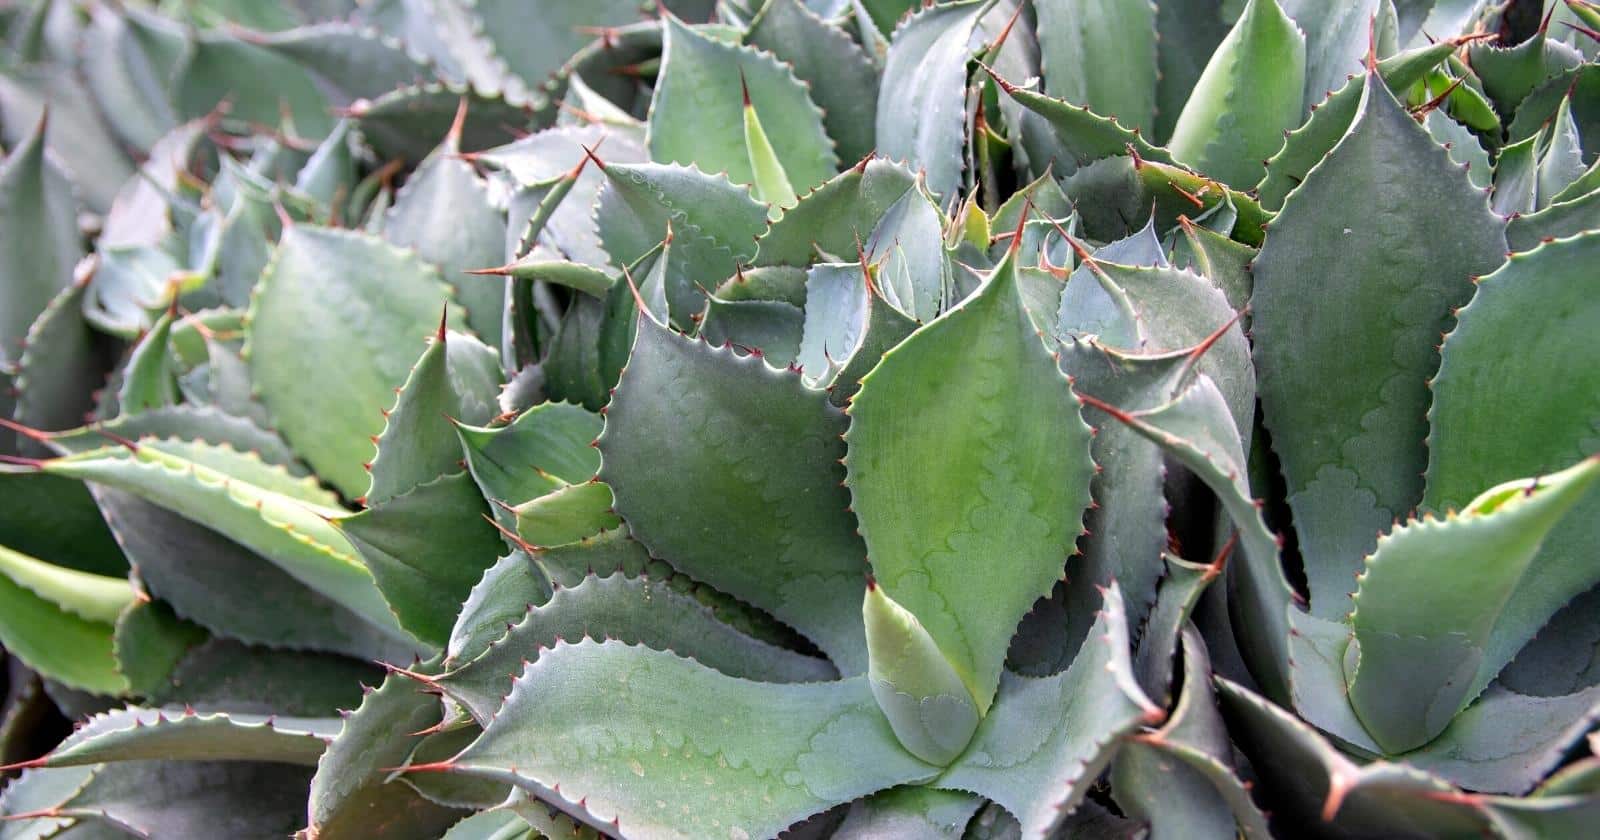 31 Drought Tolerant Plants That Thrive in Dry Conditions